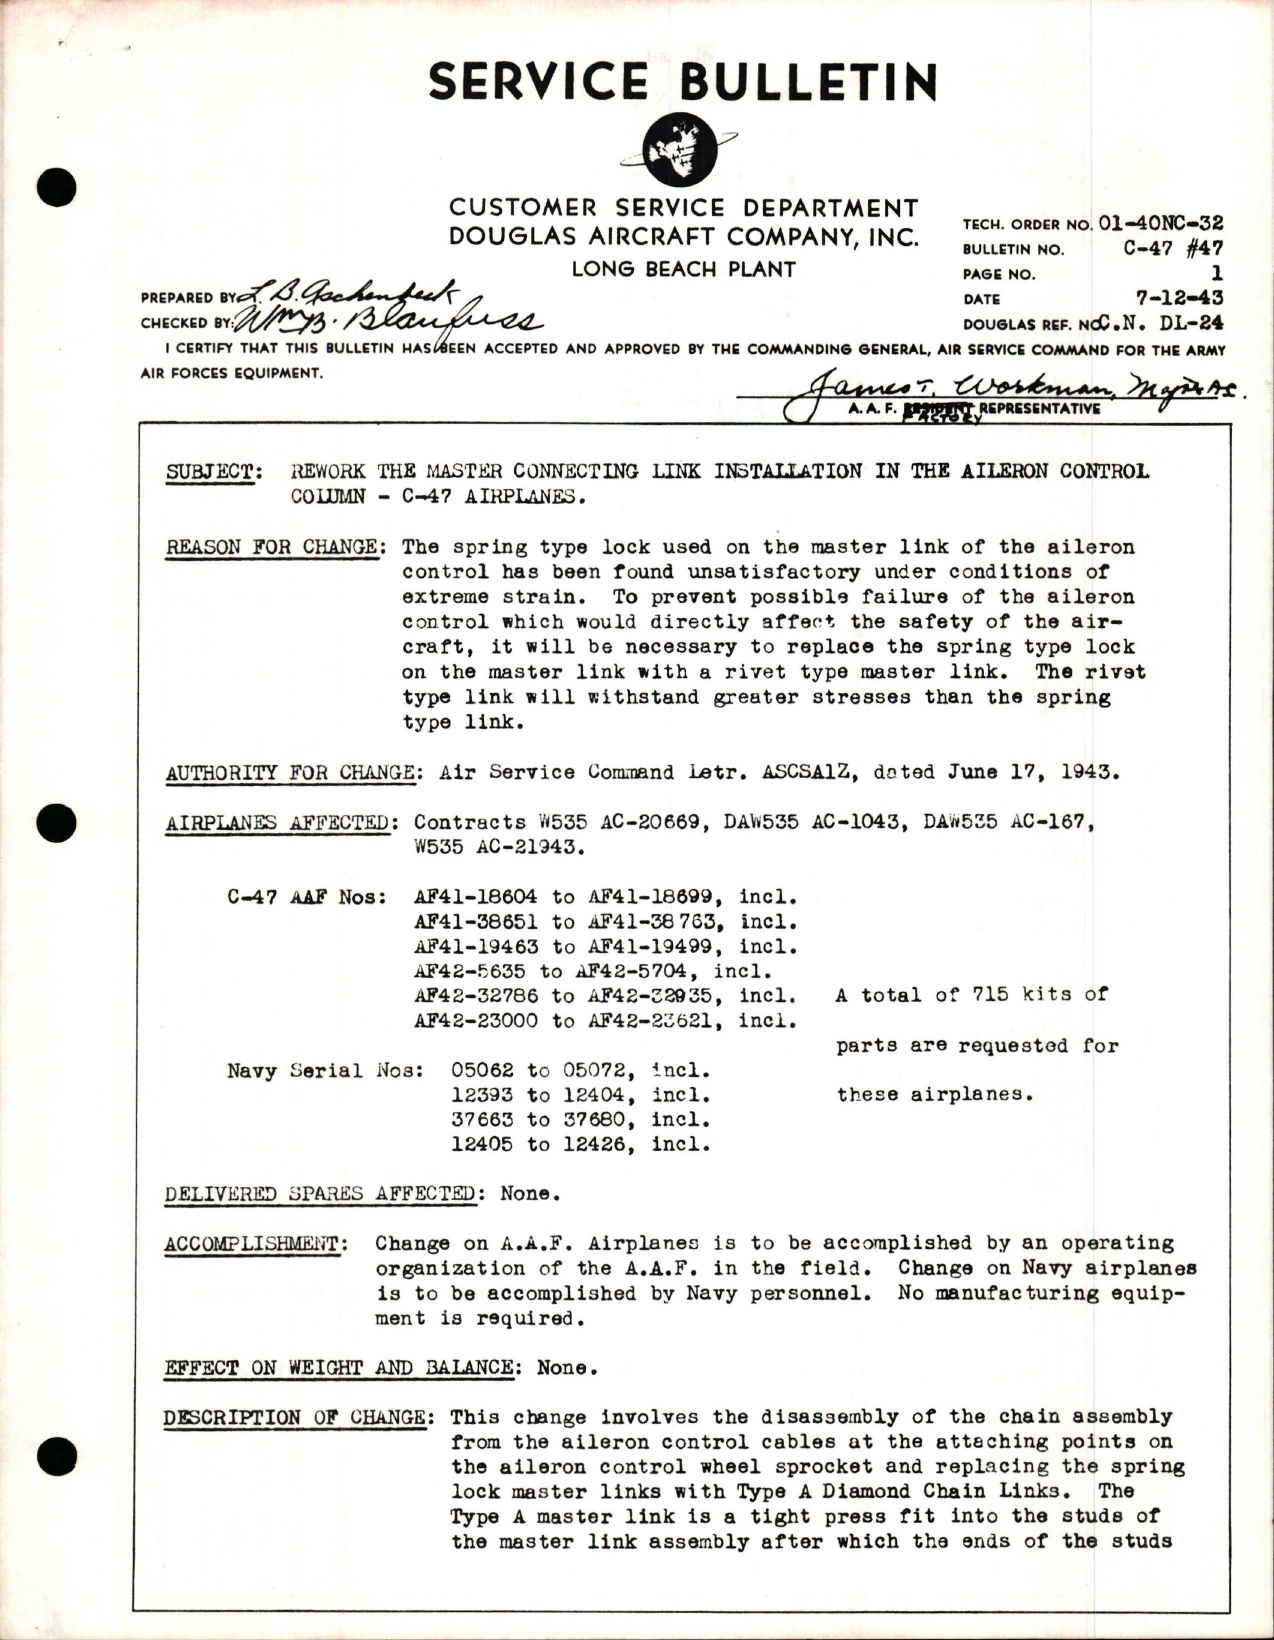 Sample page 1 from AirCorps Library document: Rework the Master Connecting Link Installation in the Aileron Control Column